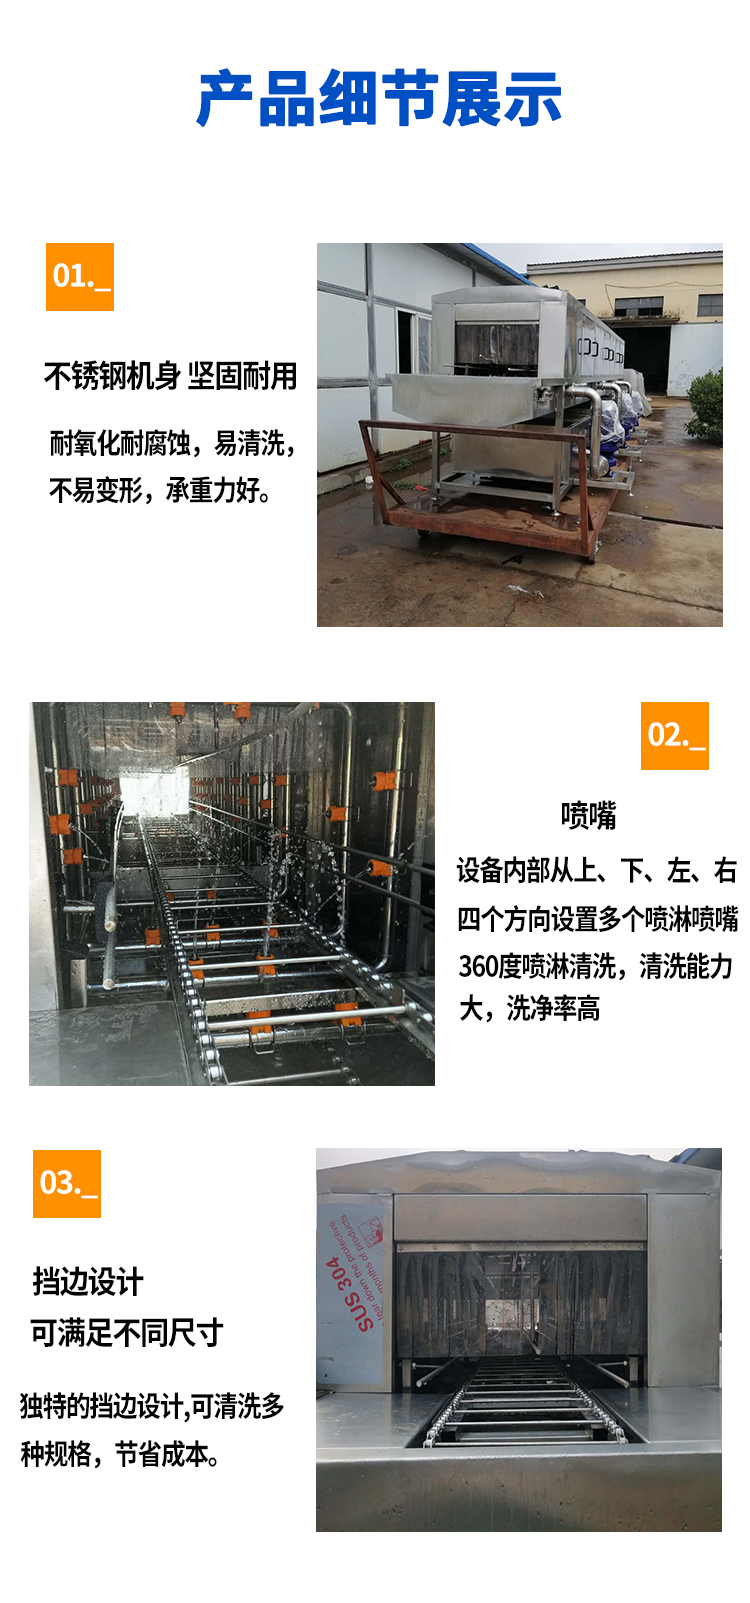 Plastic basket cleaning machine, nylon plate cleaning equipment, high-pressure spray food basket cleaning machine manufacturer